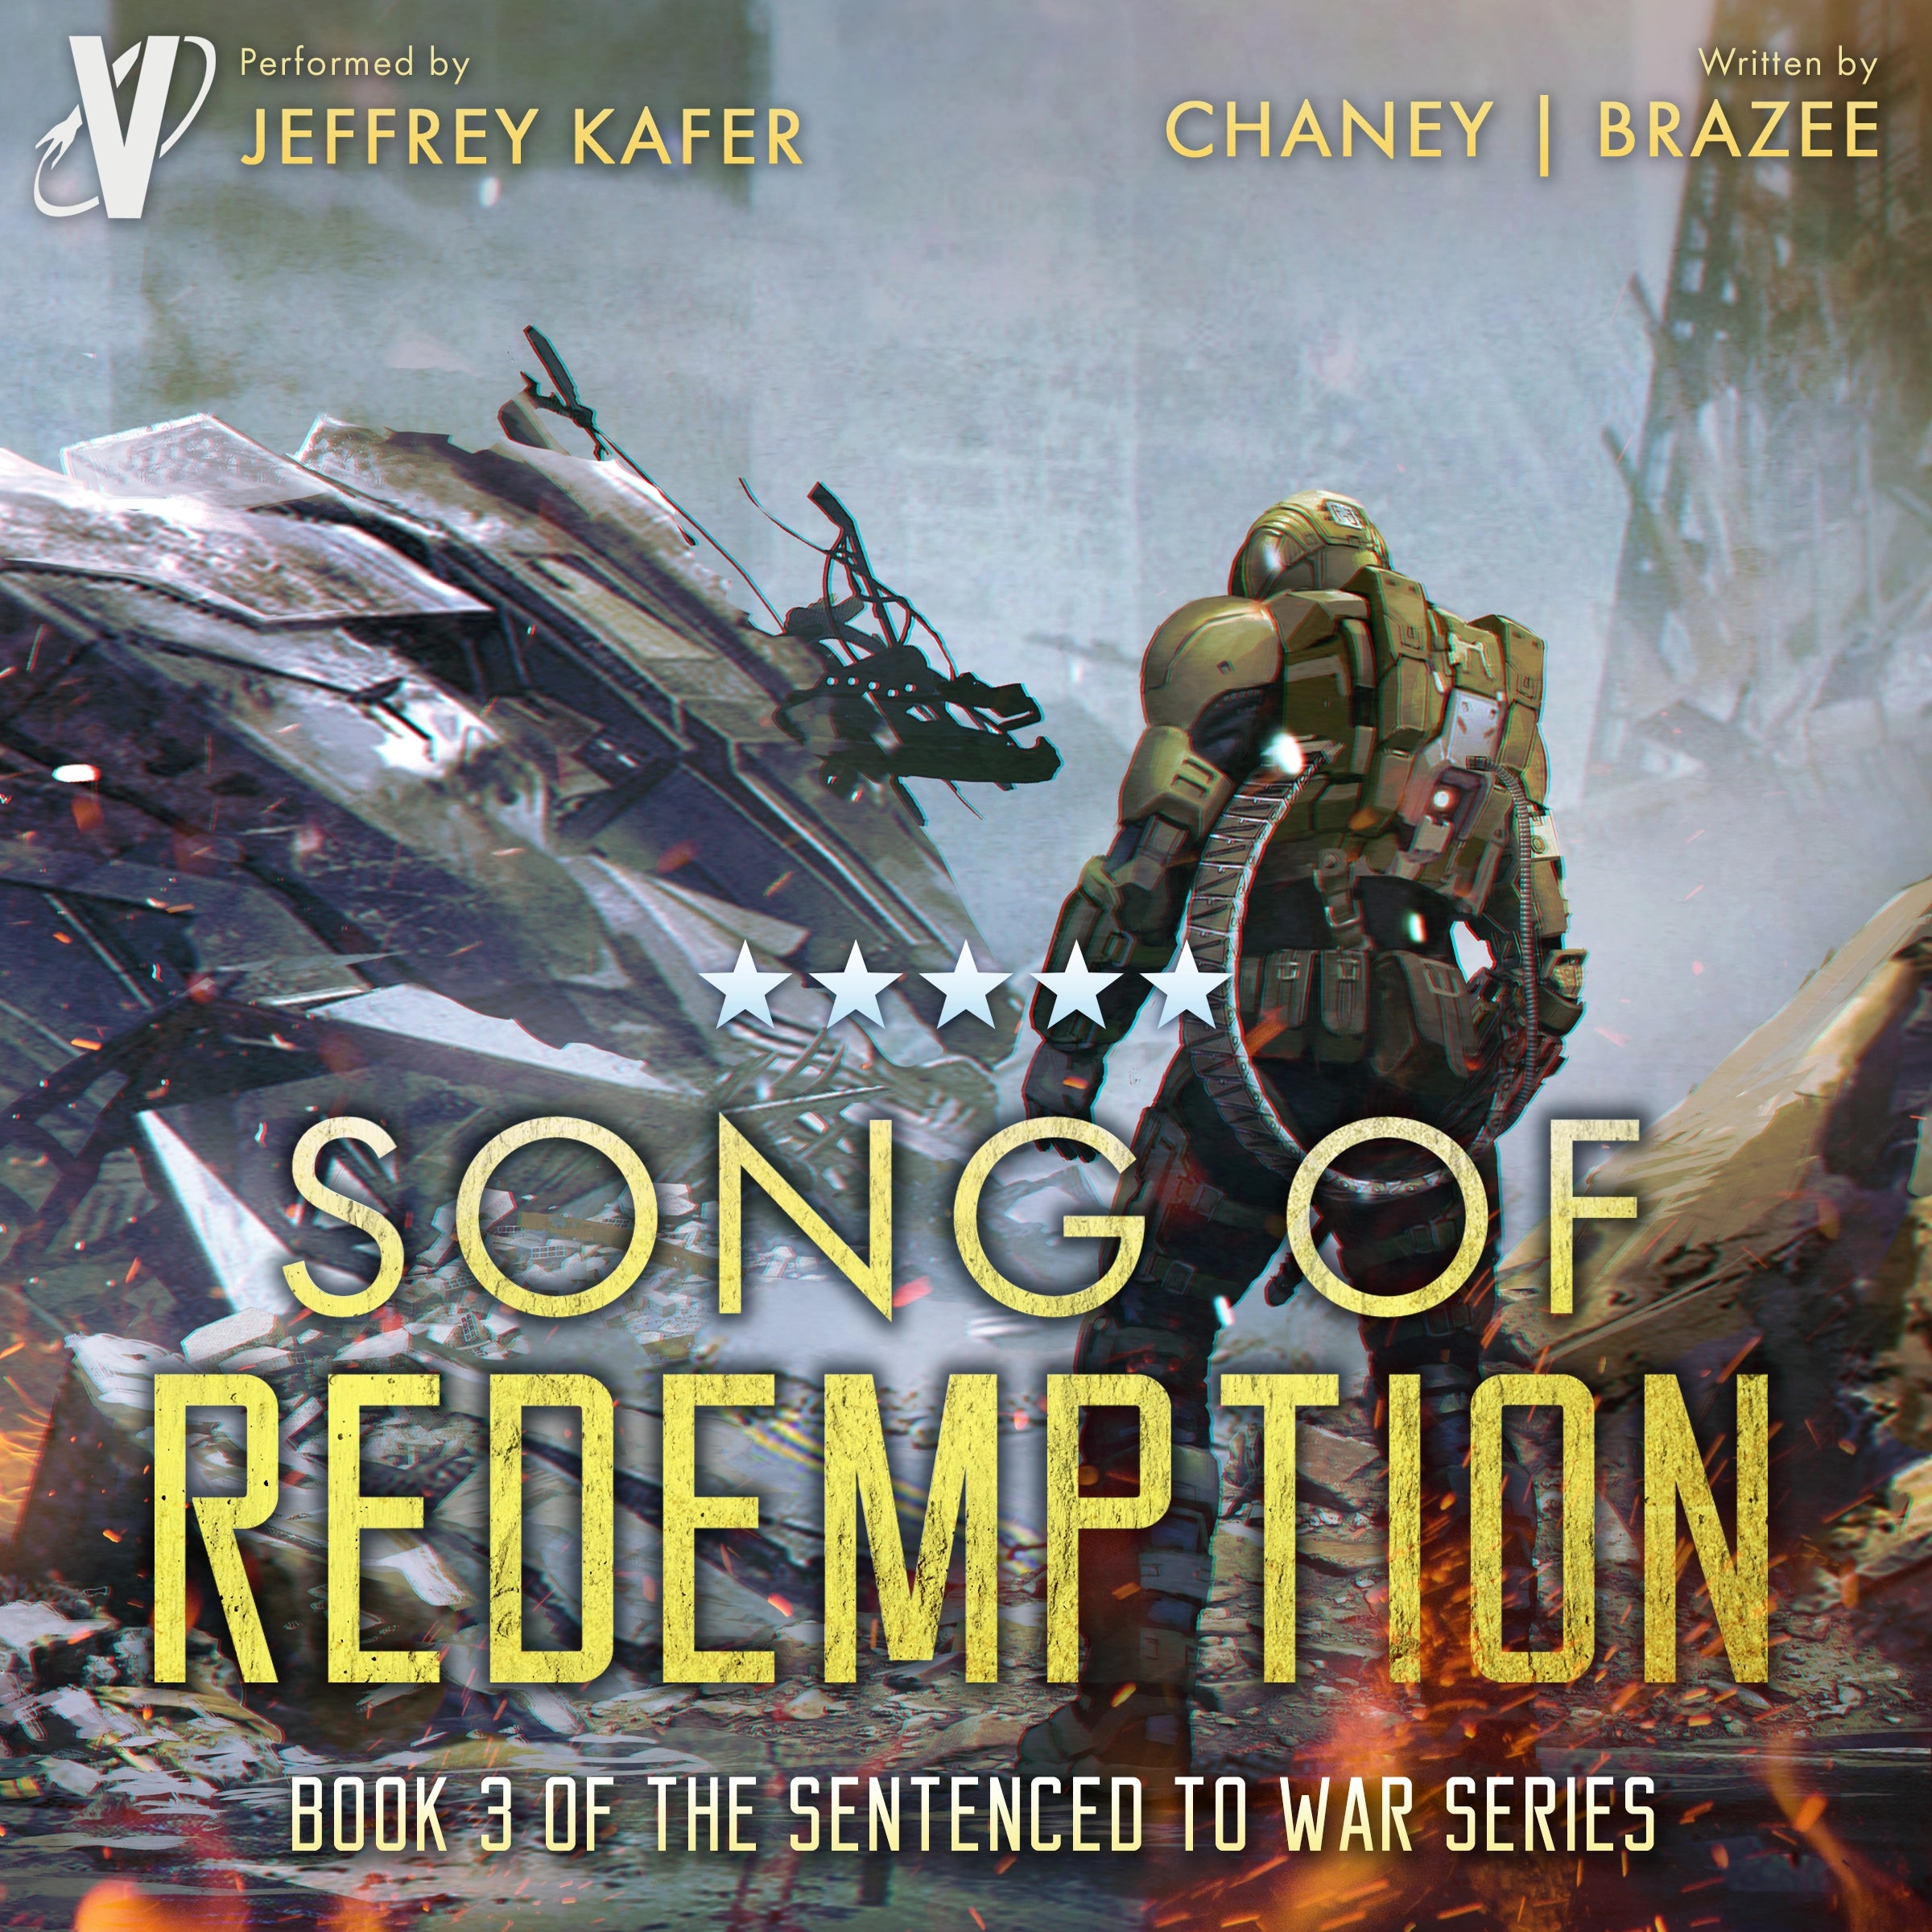 Sentenced to War 3 Audiobook: Song of Redemption